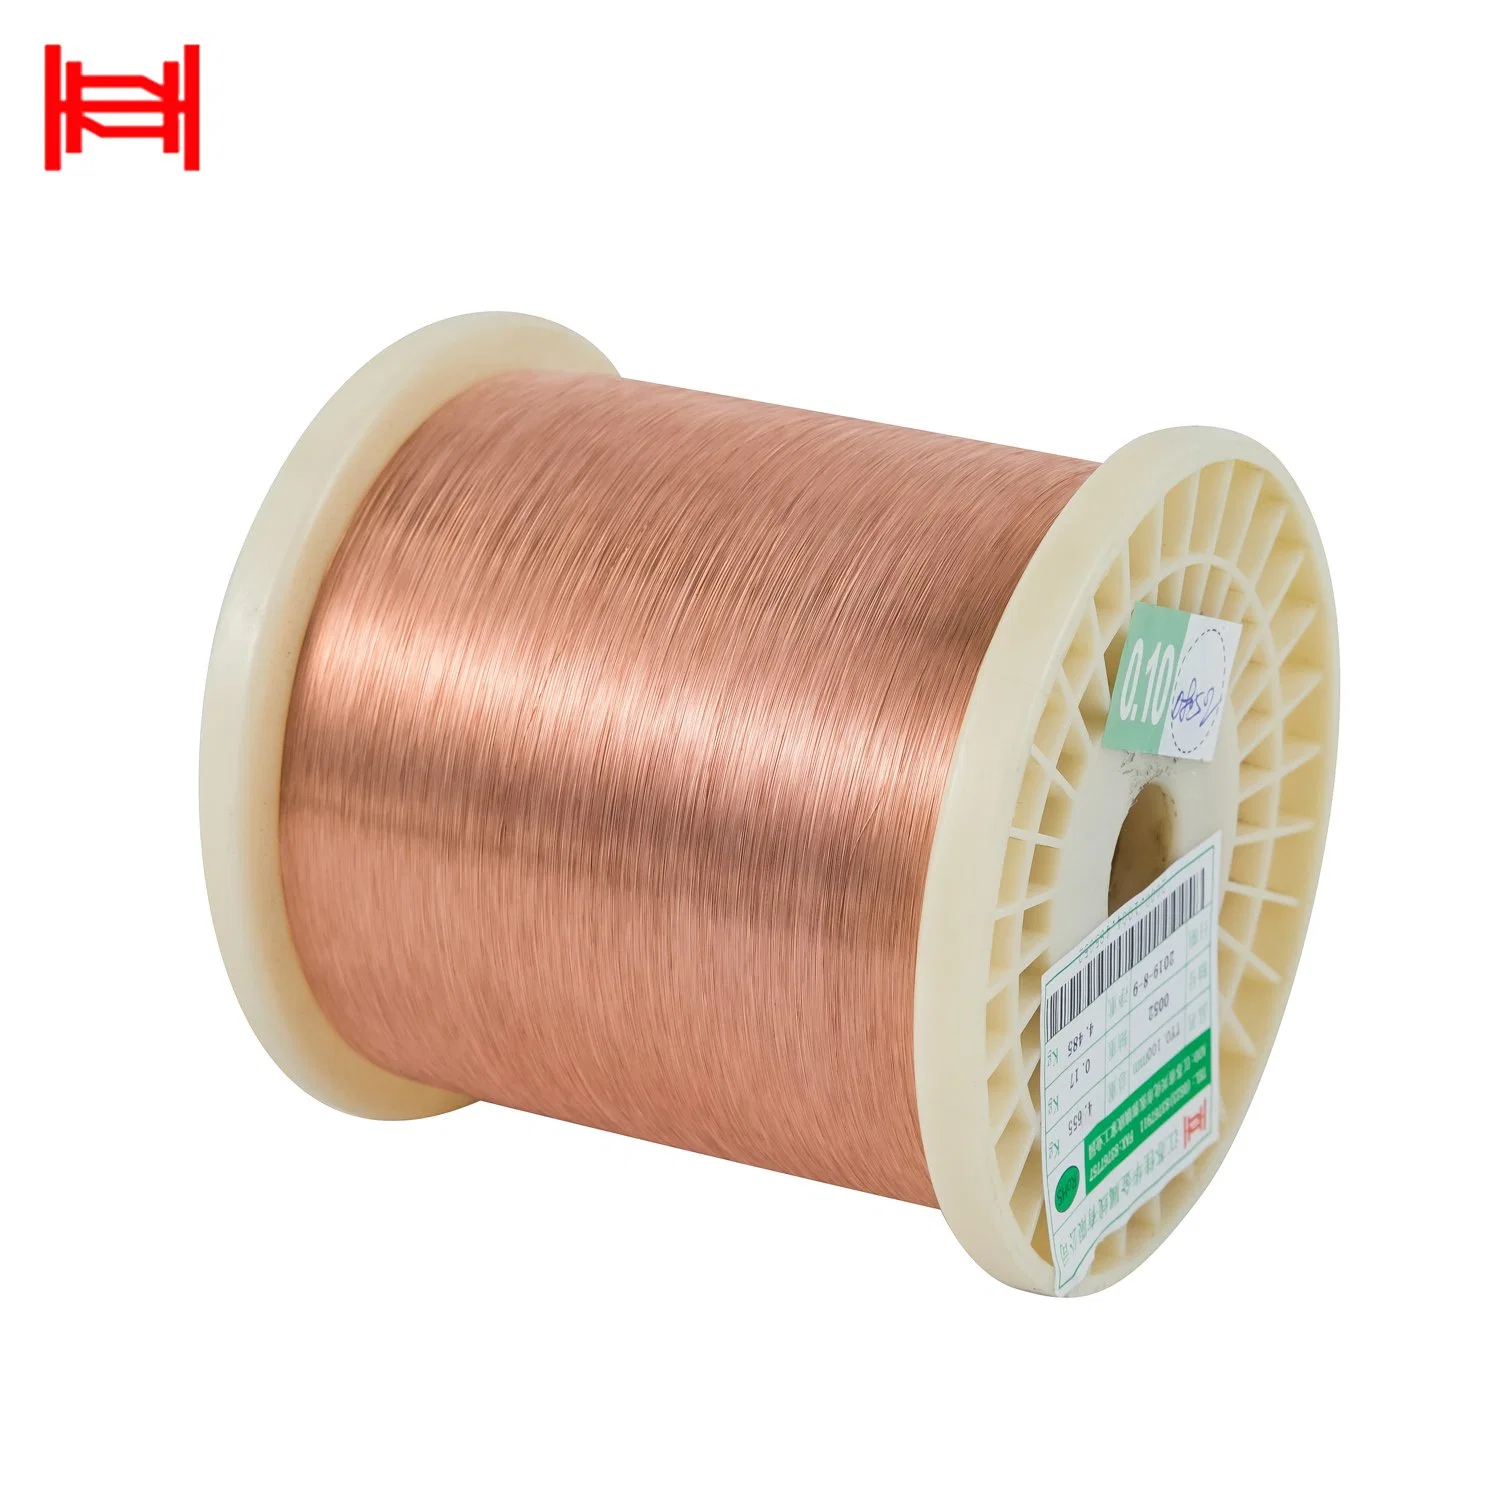 Enameled 21 AWG Solderable CCA Copper Clad Aluminum Winding Wire